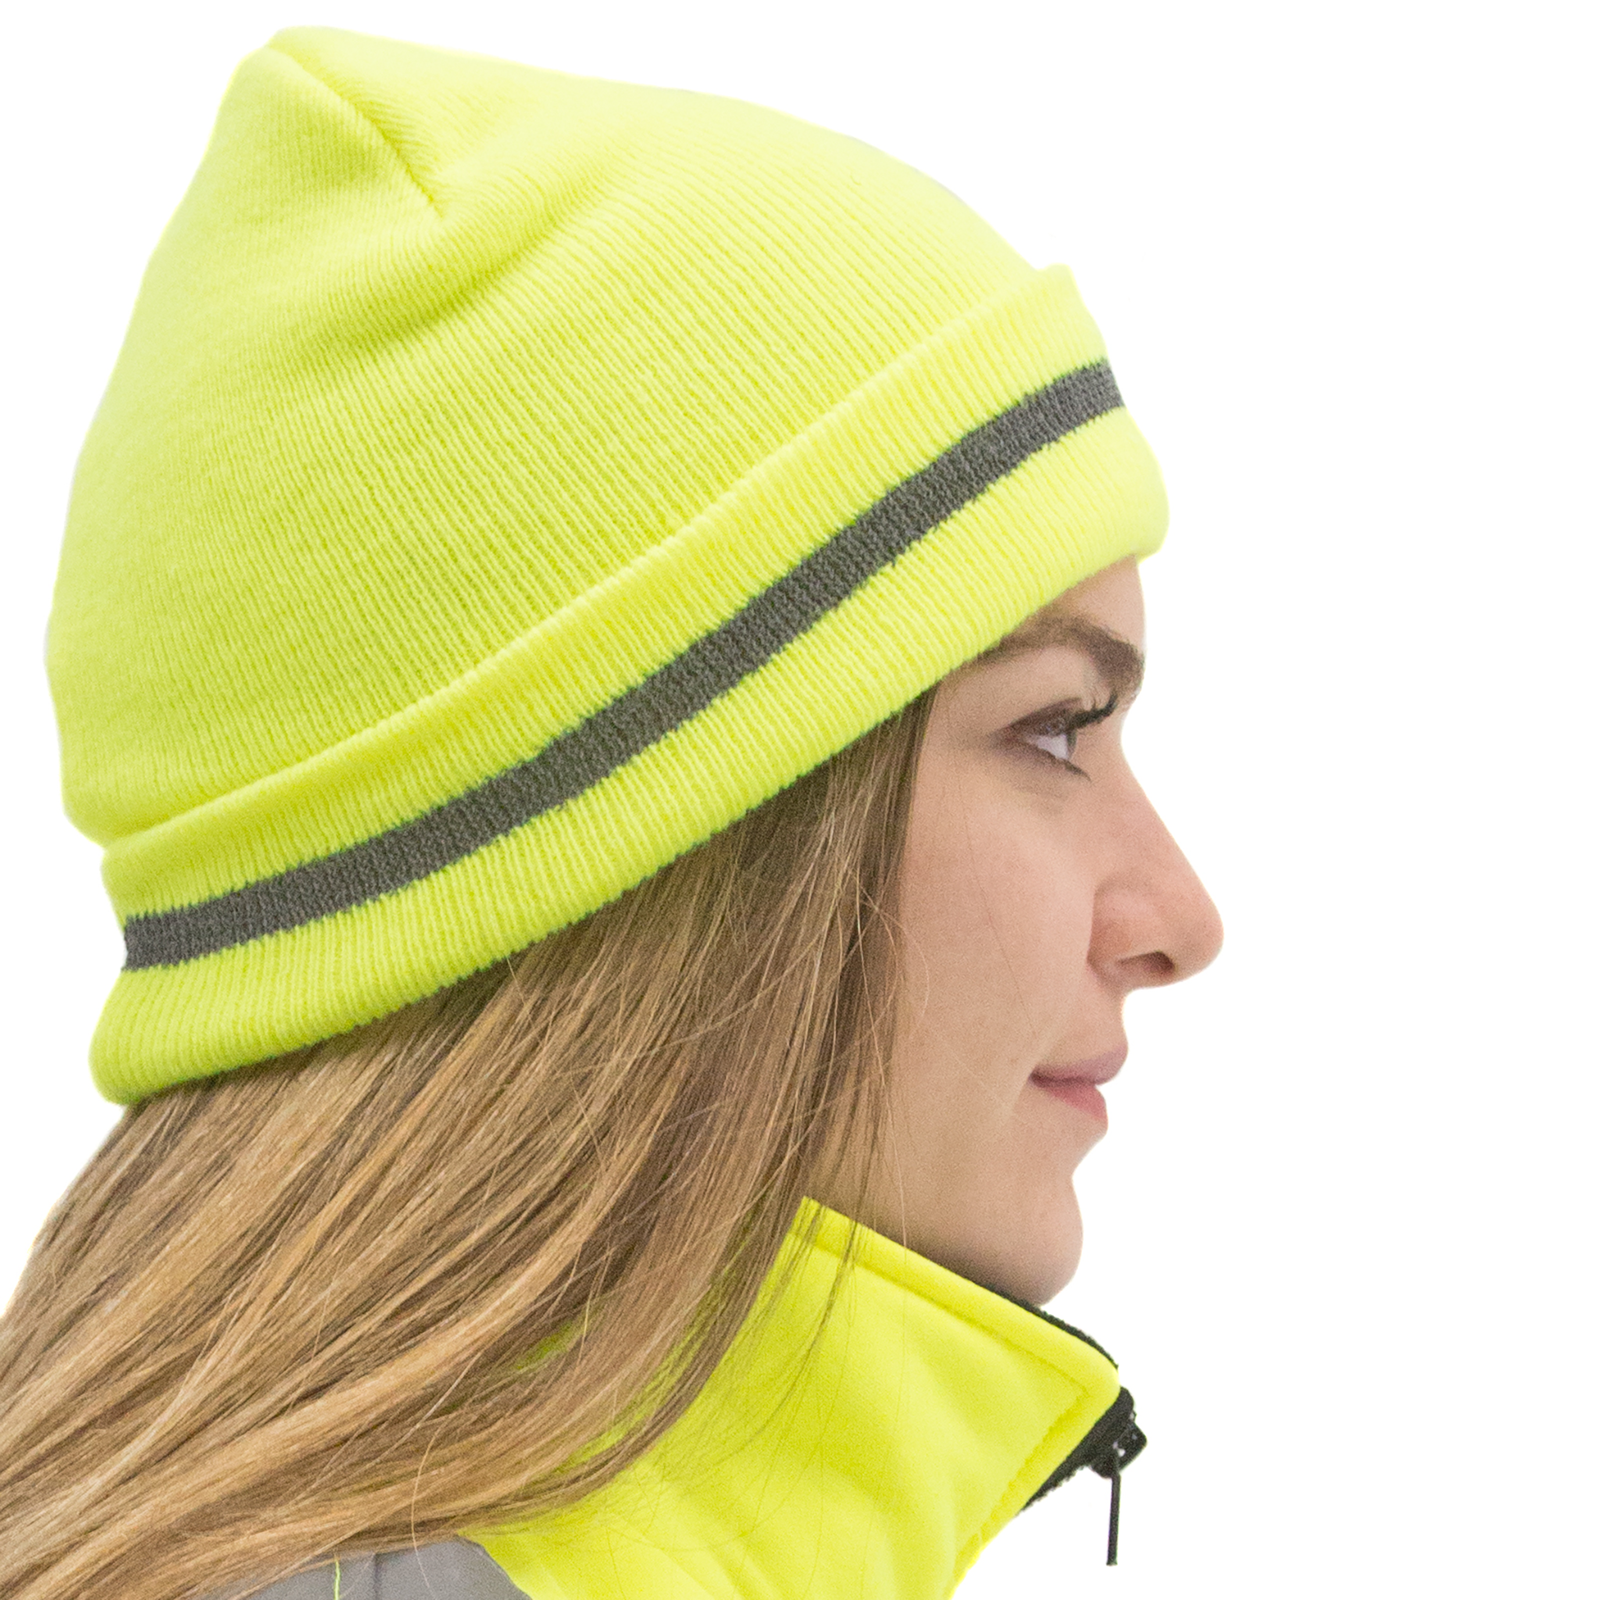 A woman with long hair wearing the lime JORESTECH hi vis beanie hat